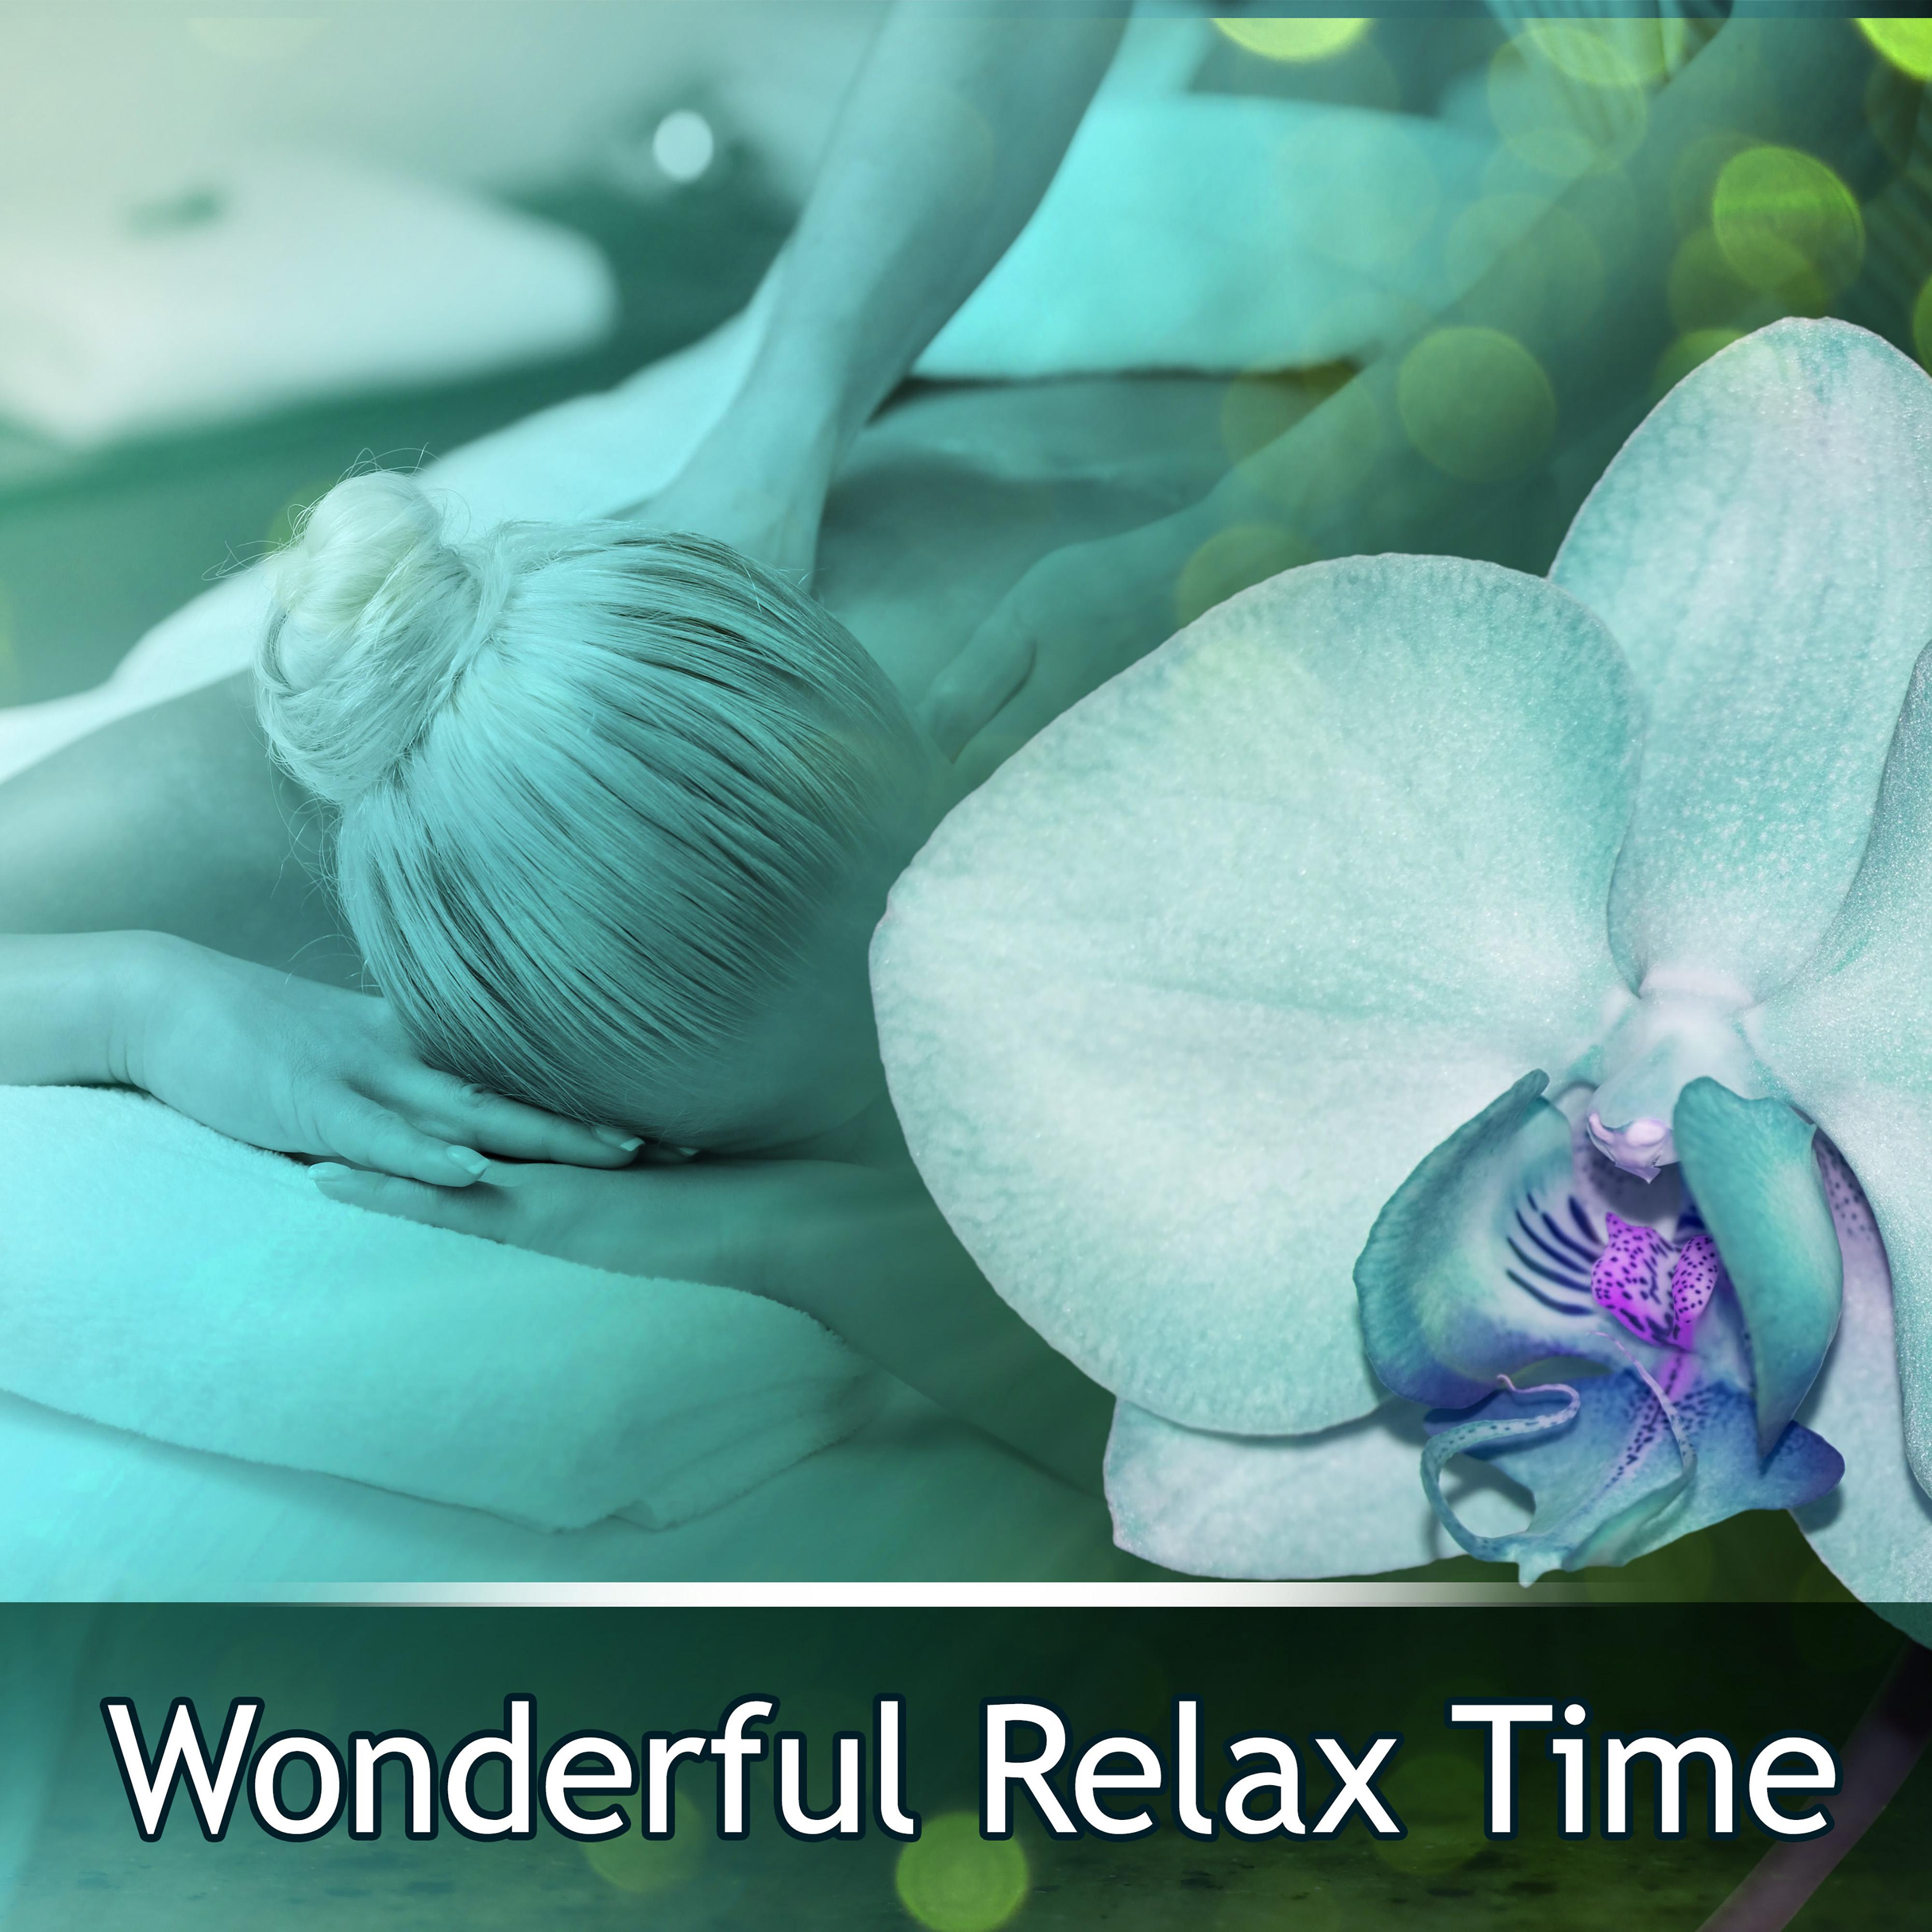 Wonderful Relax Time  Relaxing Music for Spa, Massage, Wellness, Rest, Ultimate Chill